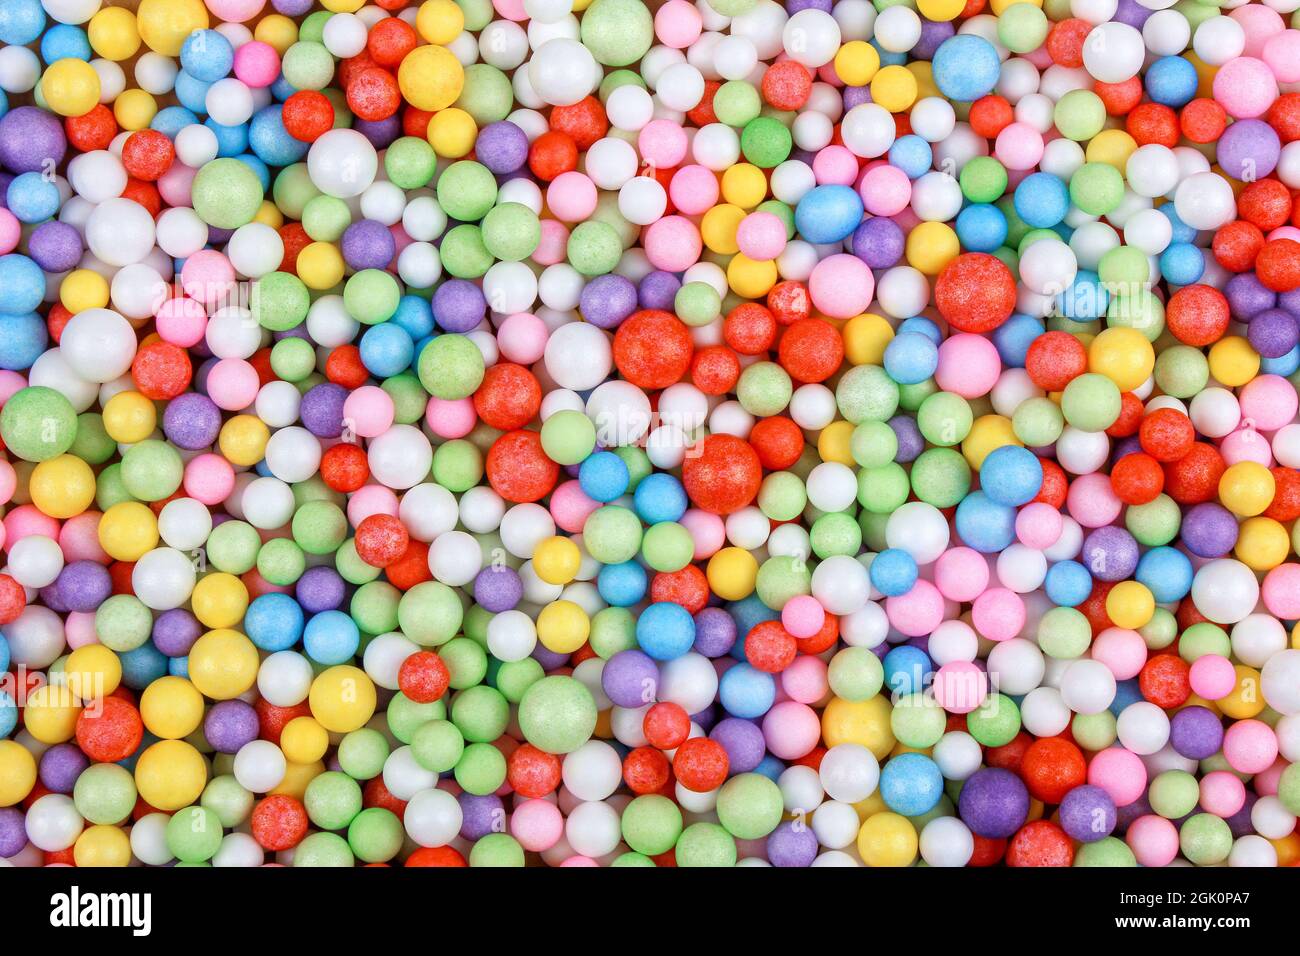 Colorful foam balls background. Abstract bright colors background. Holiday colors. Design elements. Flat lay. Copy space. Stock Photo